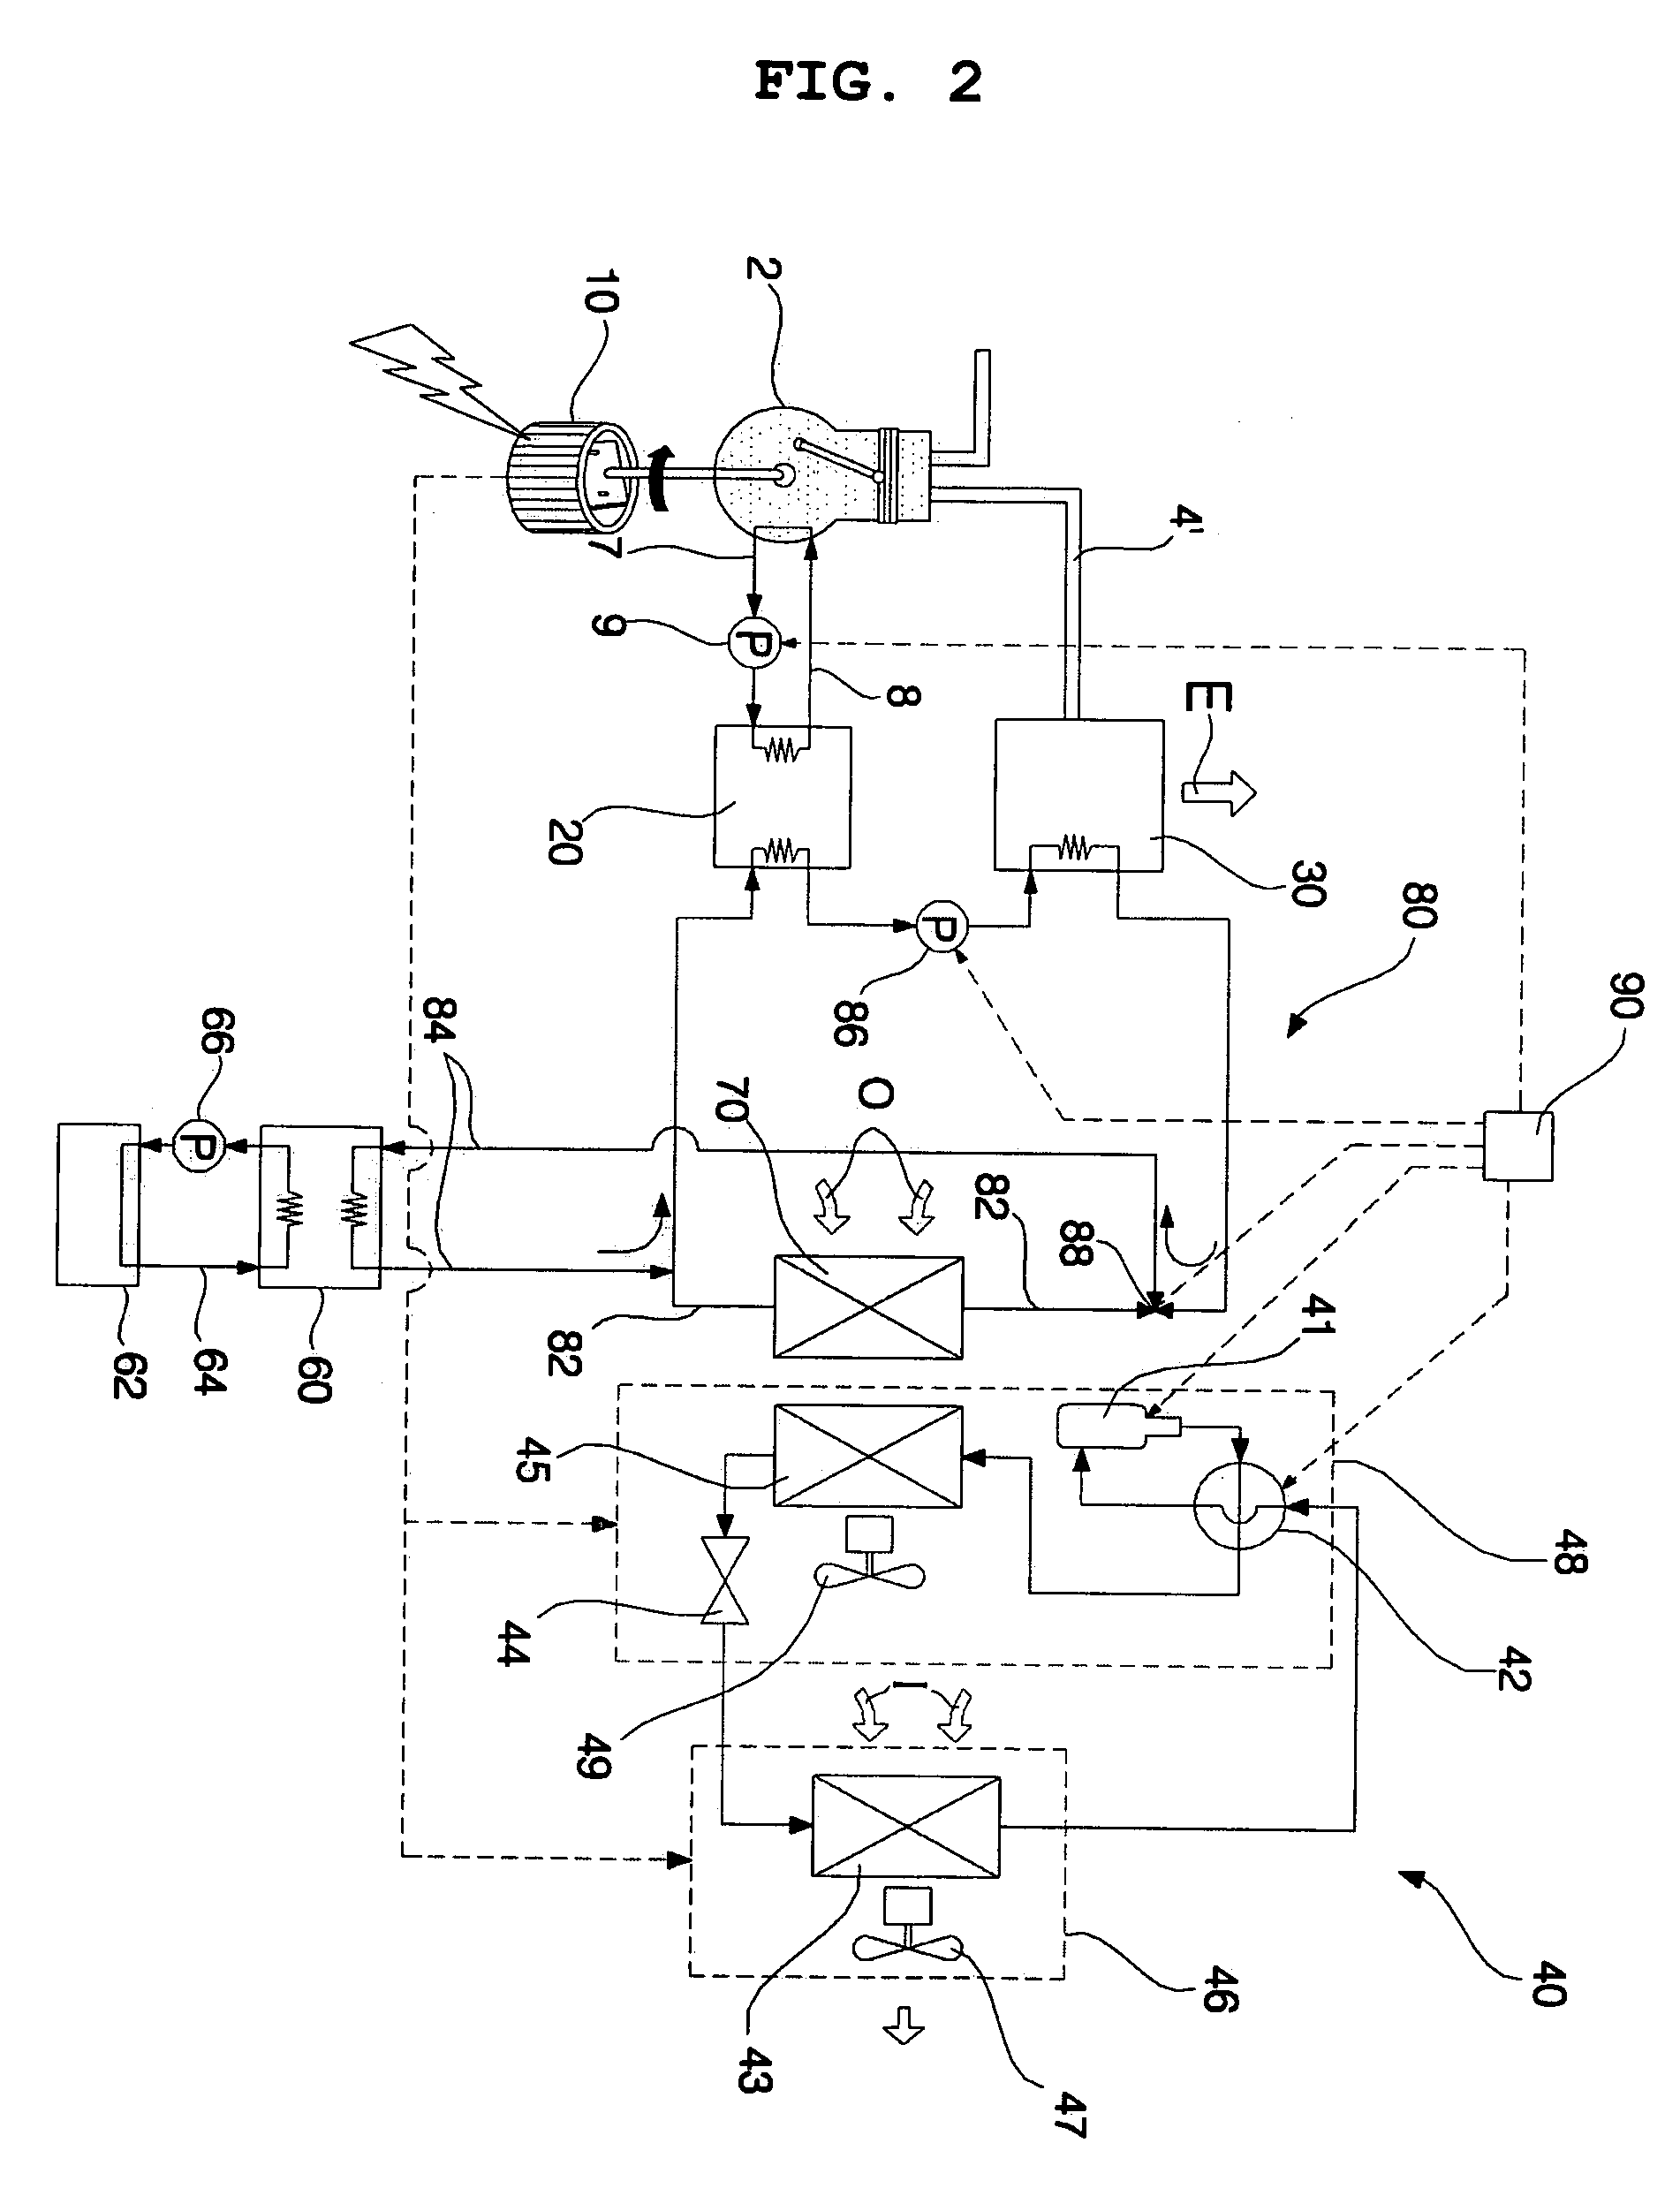 Electricity generating and air conditioning system with water heater